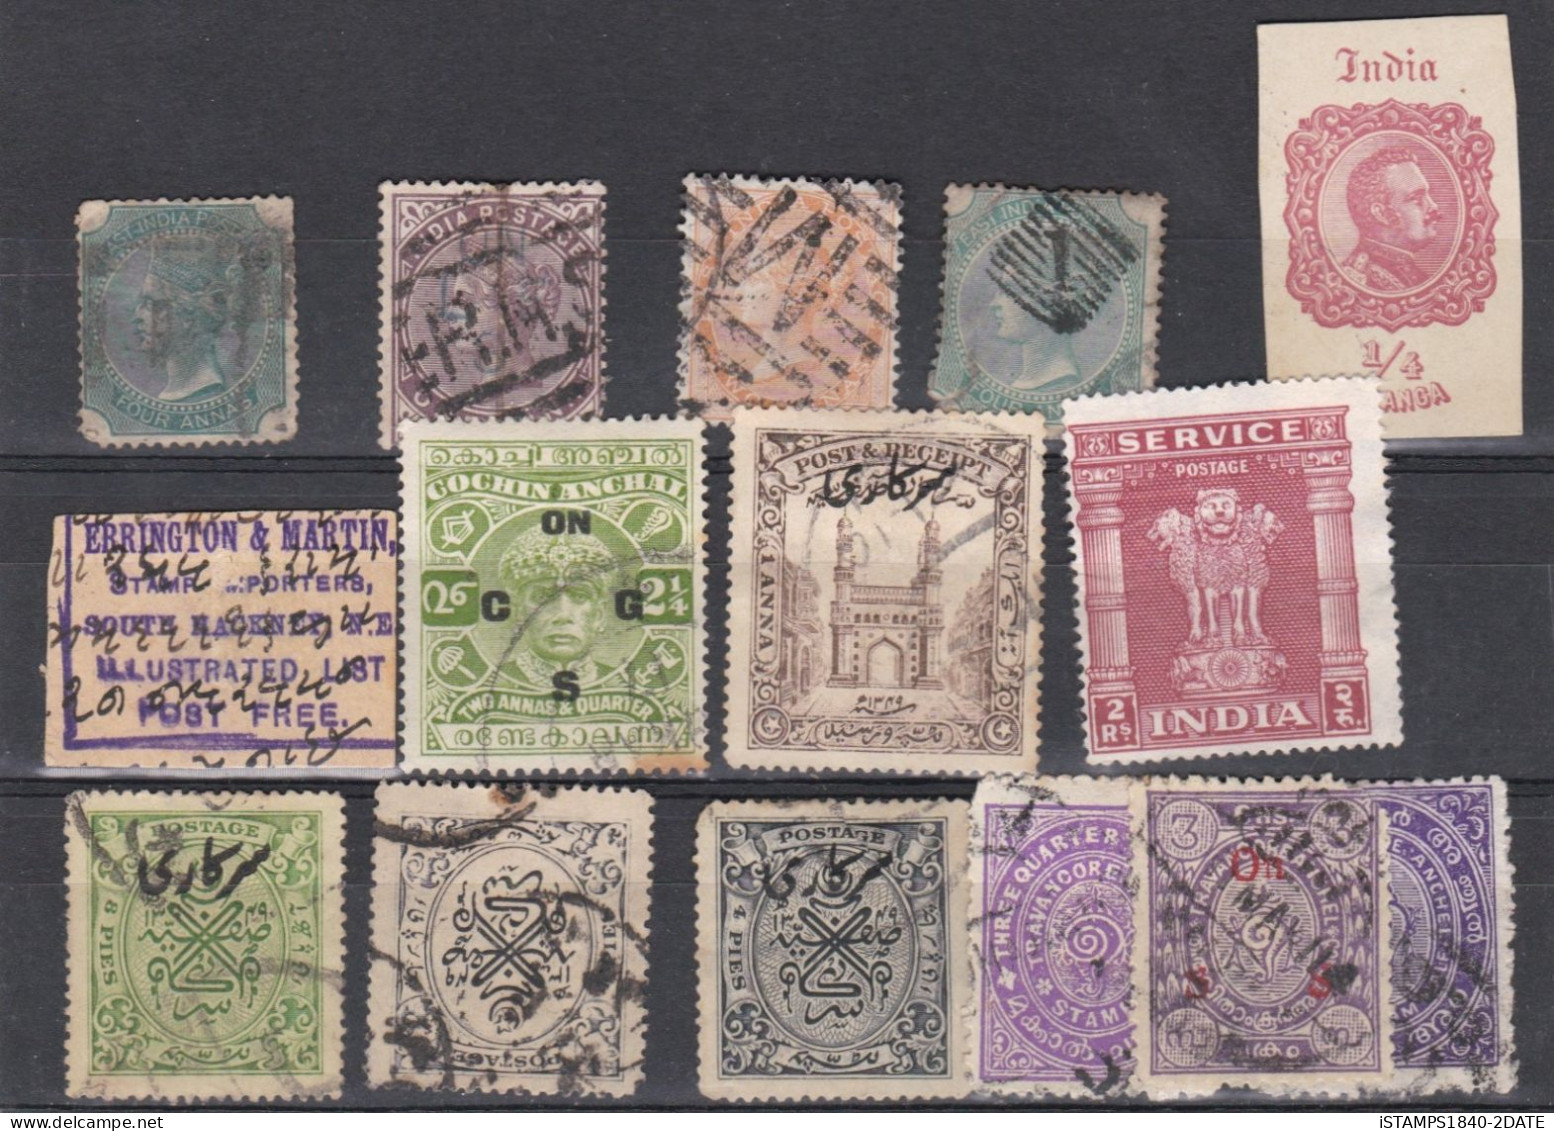 00032/ India QV+ Selection Including States 15 Items Used - 1882-1901 Keizerrijk